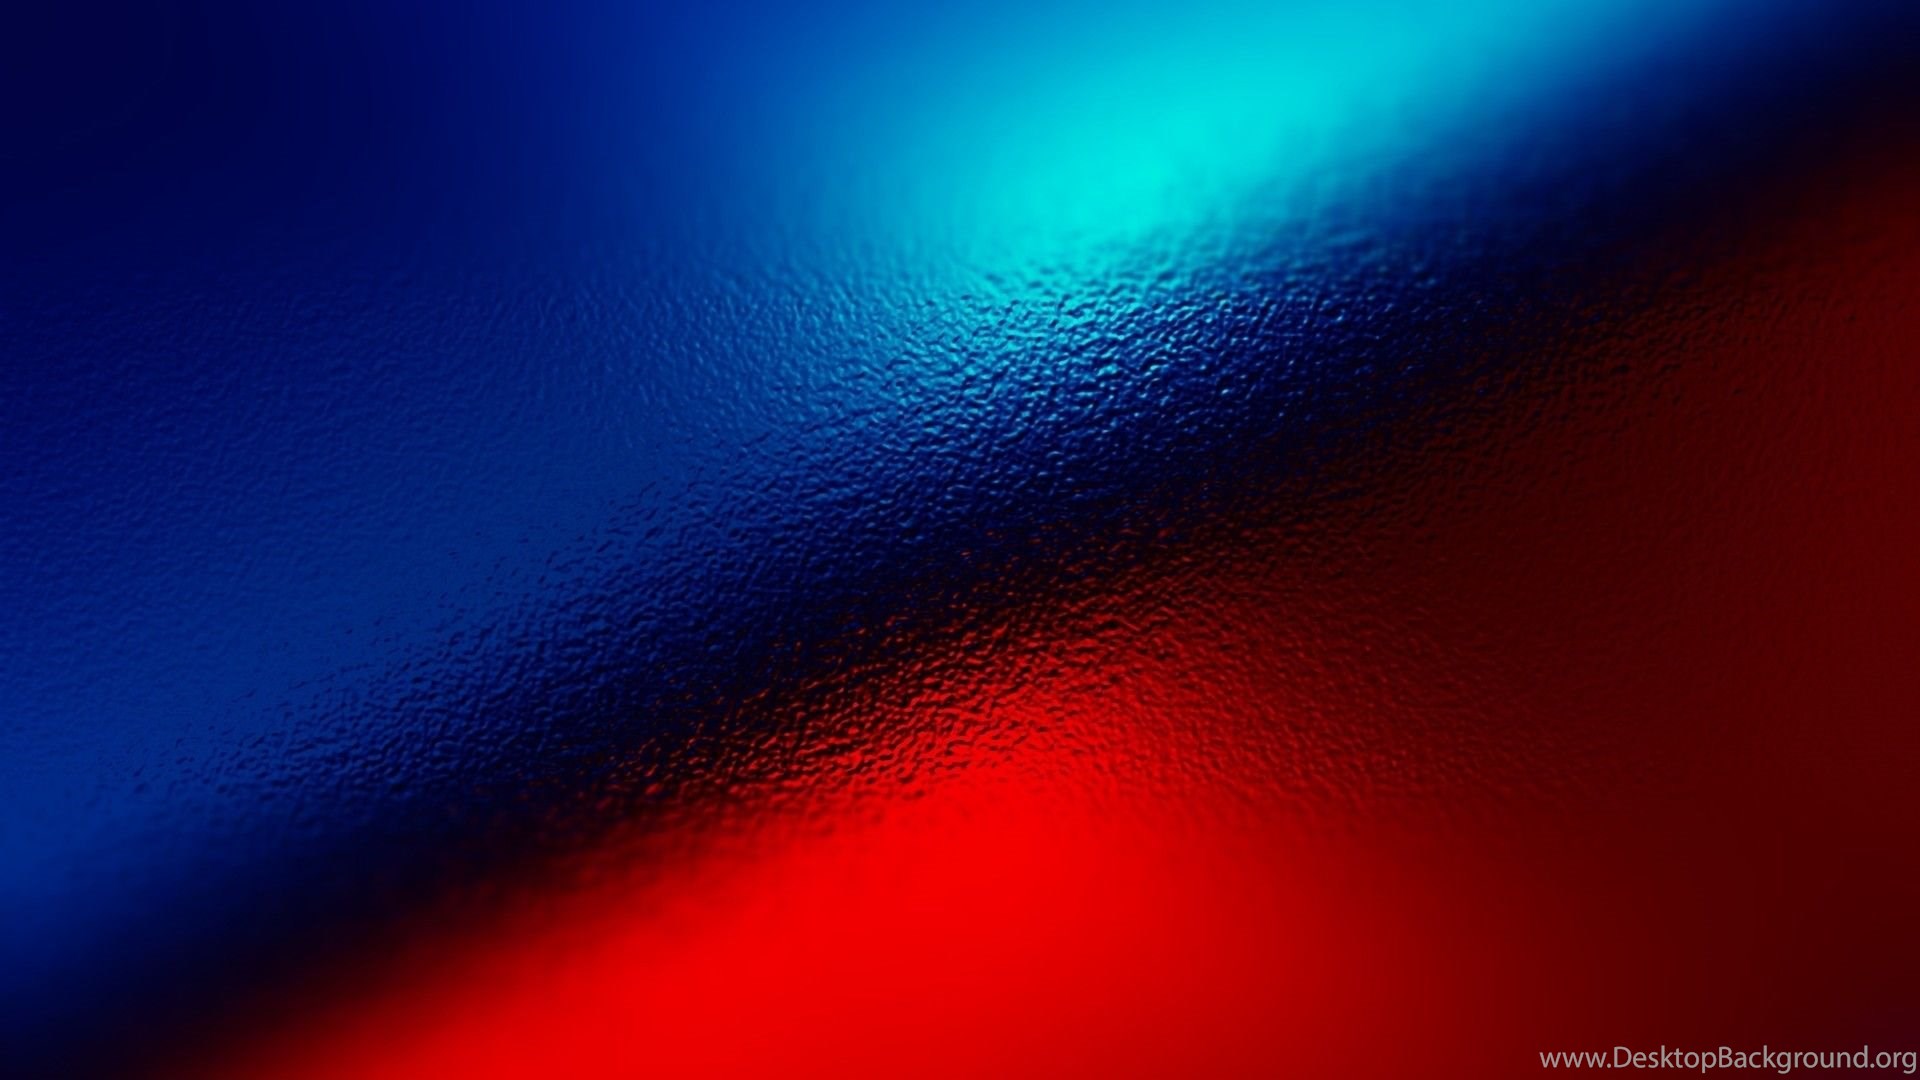 Wallpapers Red Blue Texture And 1920x1080 Desktop Background